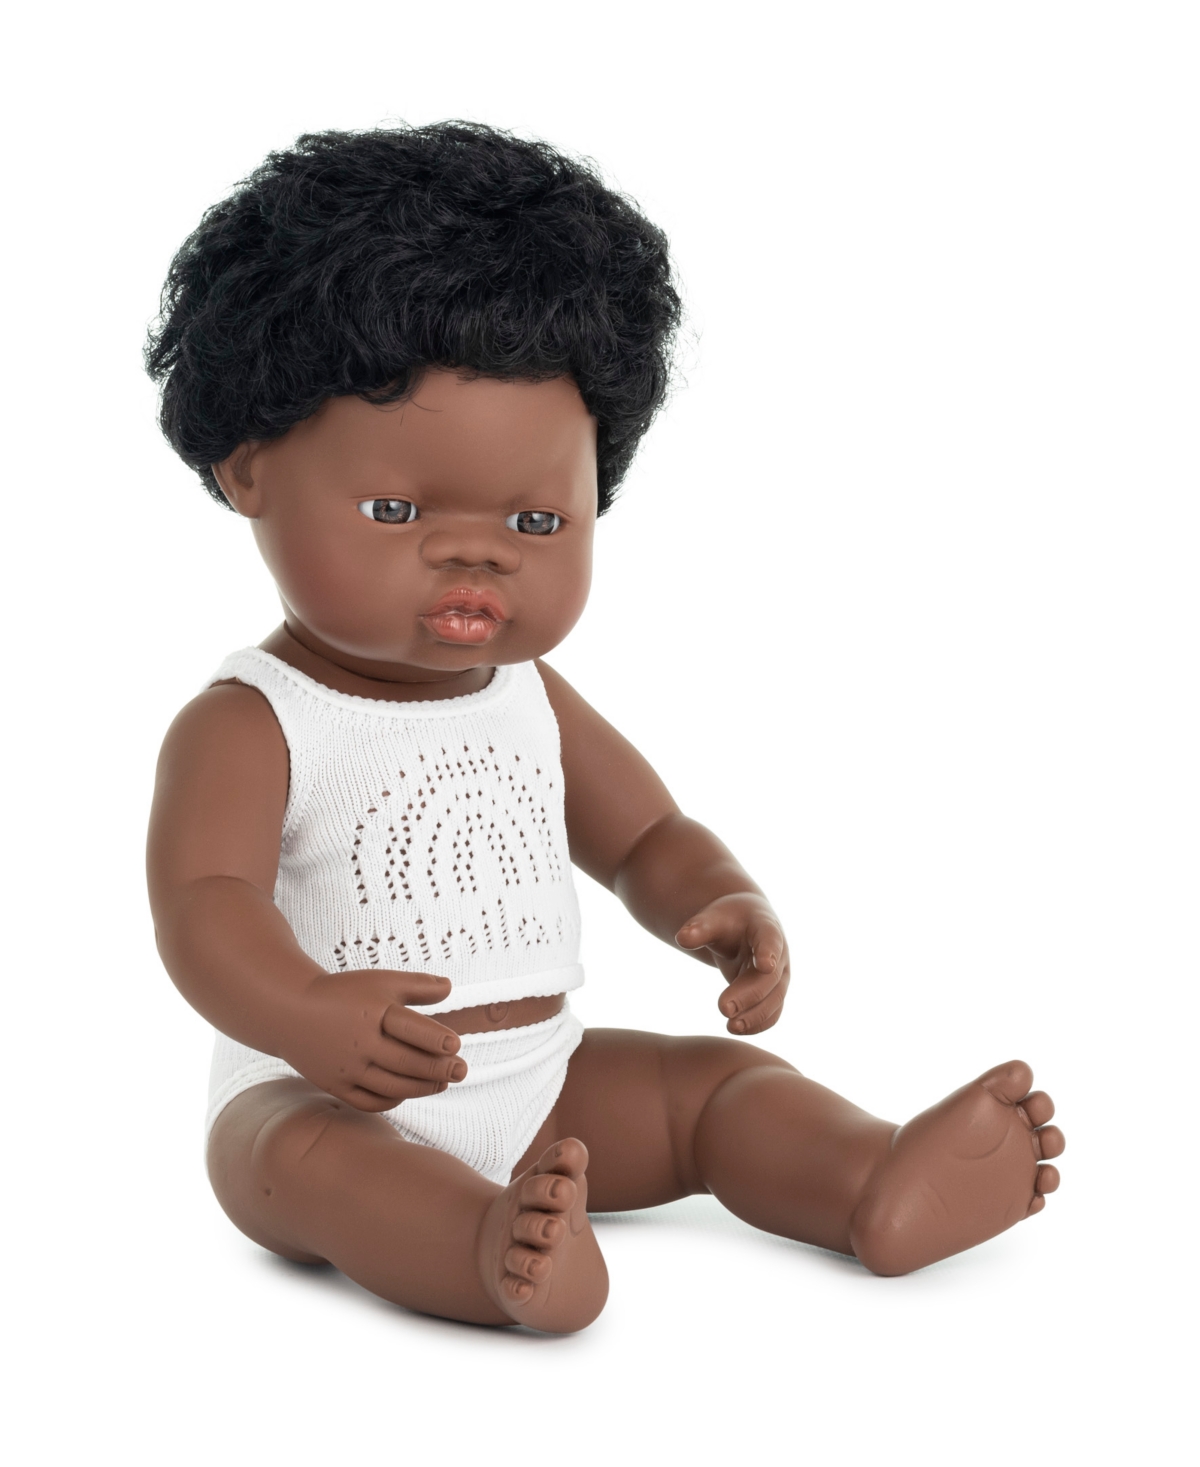 Miniland Kids' 15" Baby Doll African Boy Set, 3 Piece In No Color